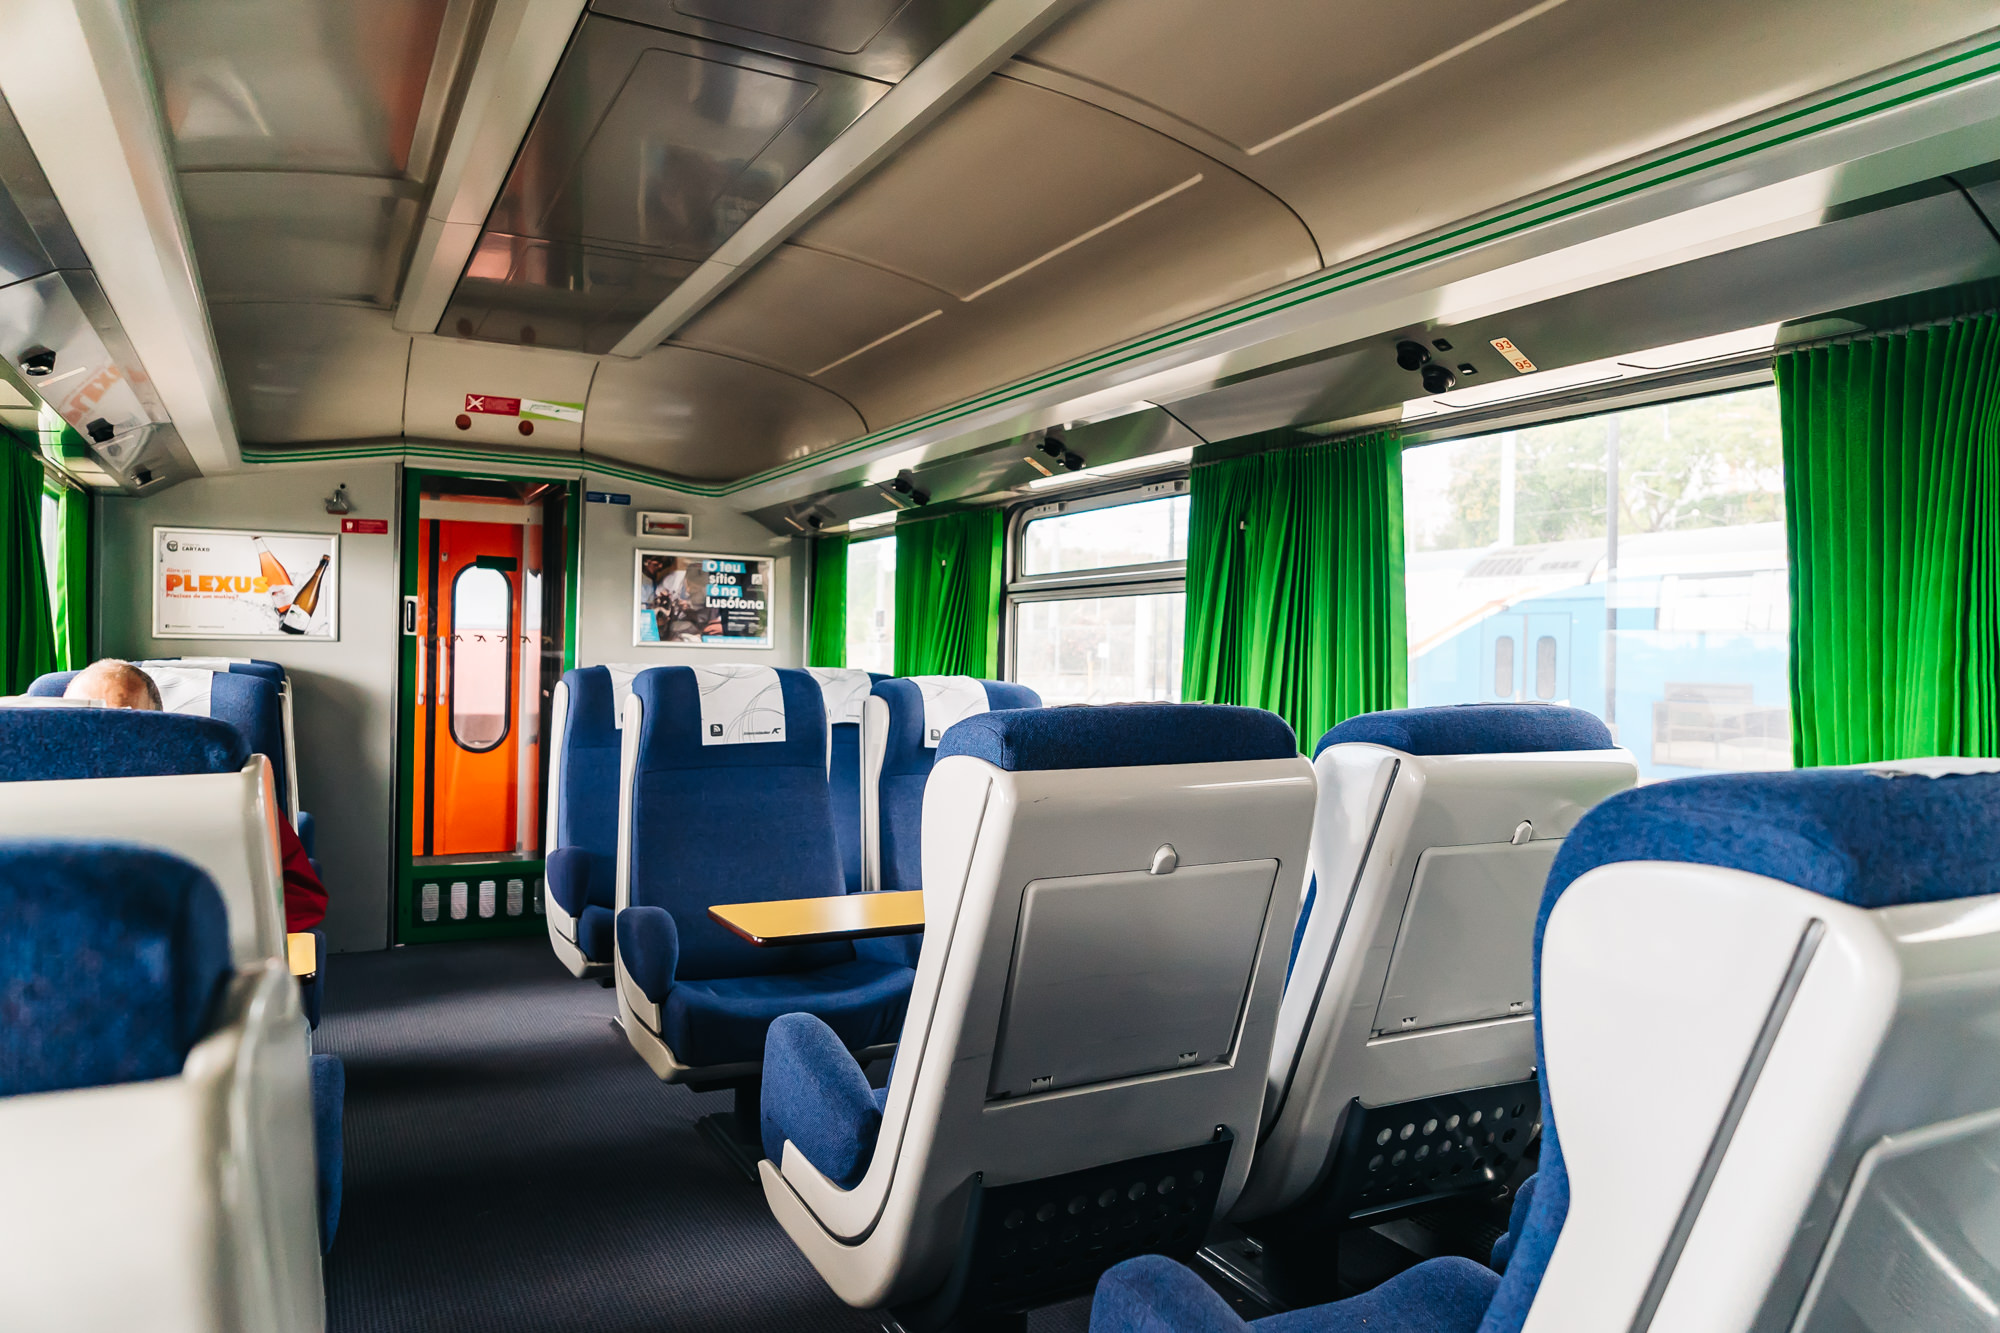 The 1st class coach interior of the Lisbon – Albufeira train operated by CP